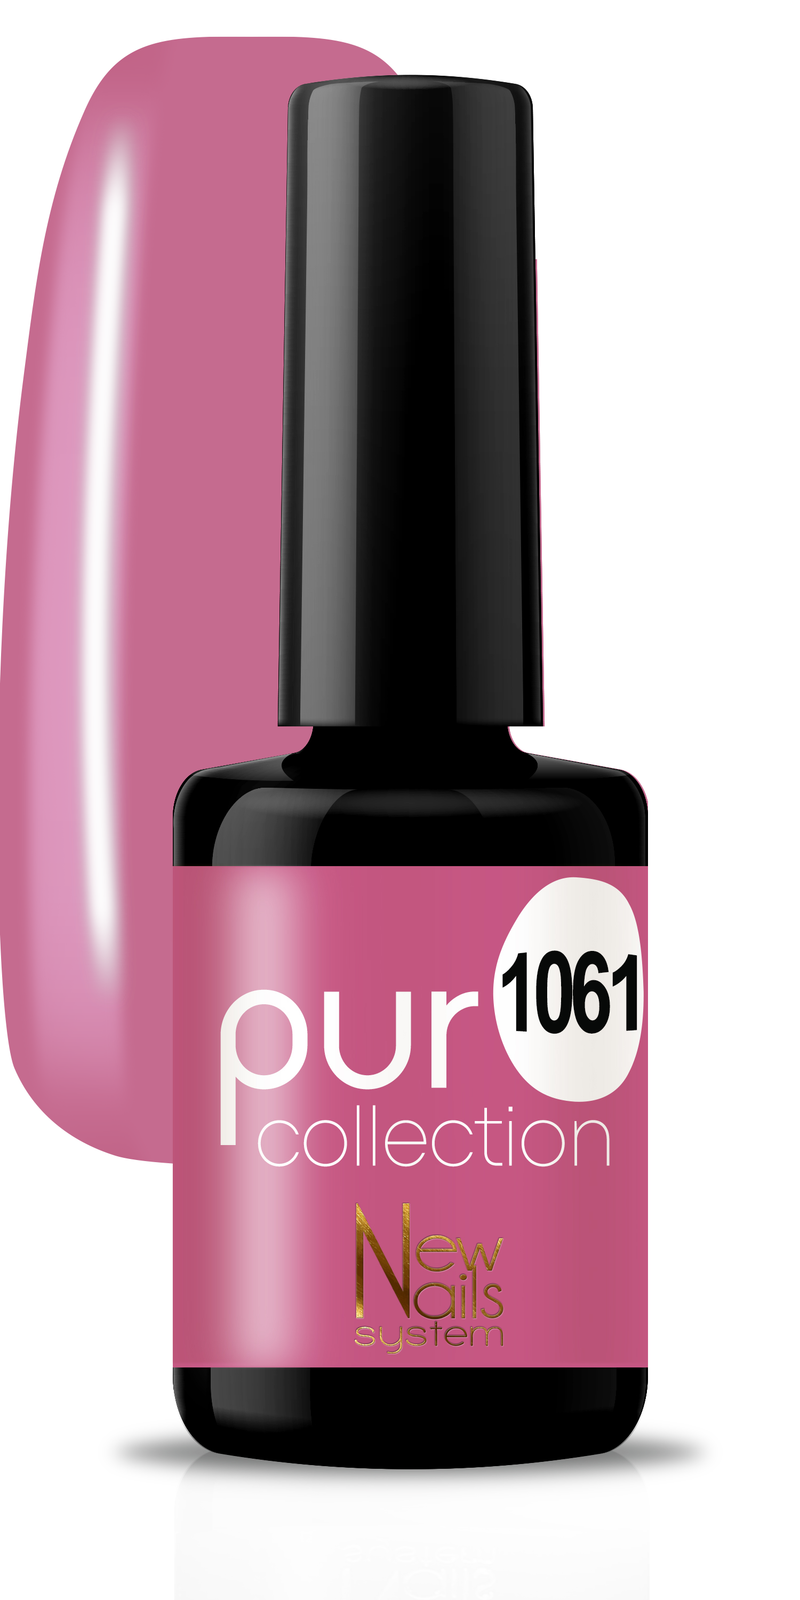 Puro collection Scent of Roses 1061 polish gel color 5ml